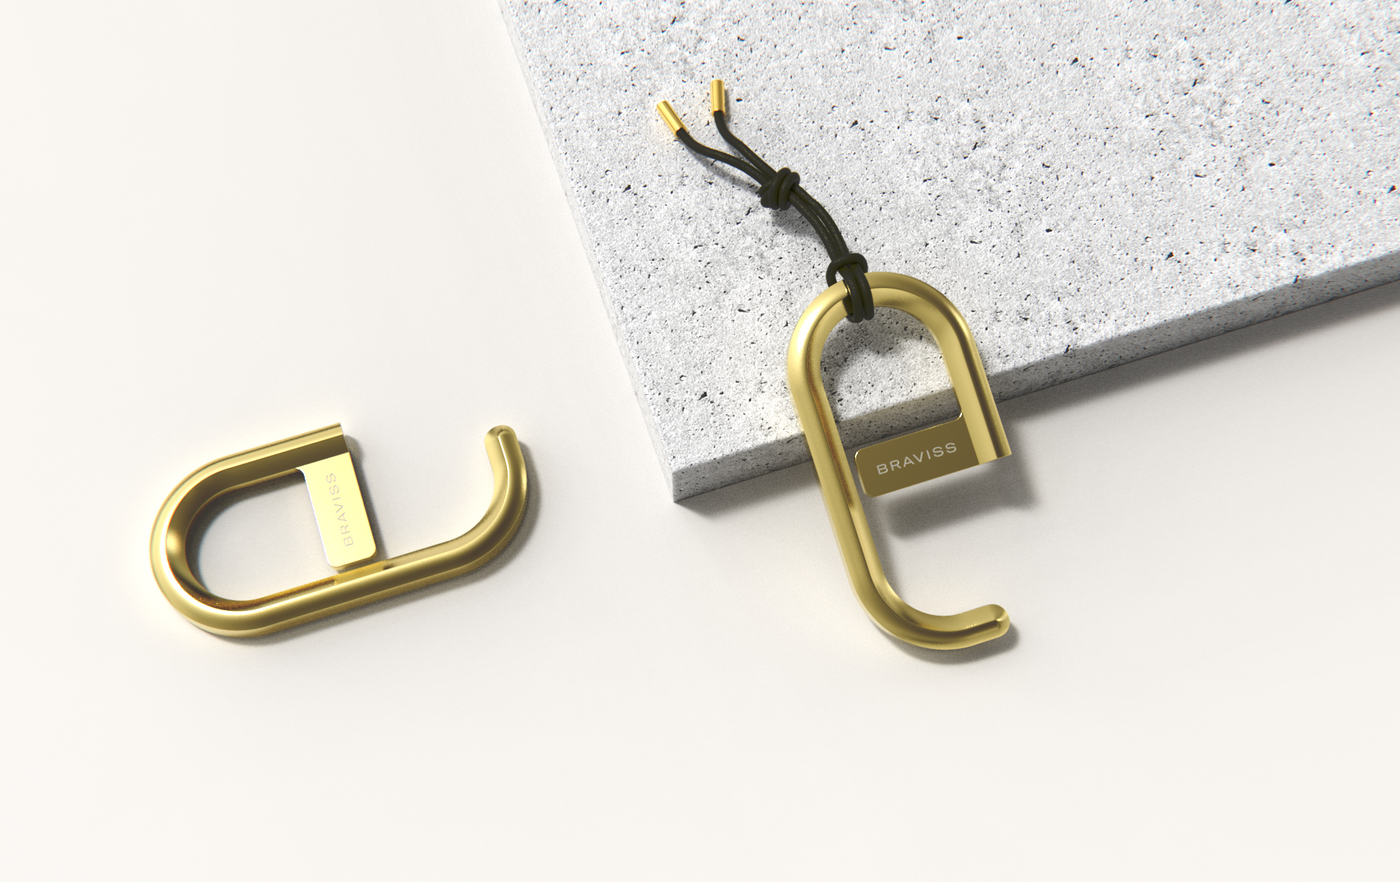 Picture of two BRAVISS brass keychain touch tool shot from the top. One product is laying flat on the left next to a marble textured stone slab. On top of lay another brass keychain touch tool with leather fob string tied to its top.